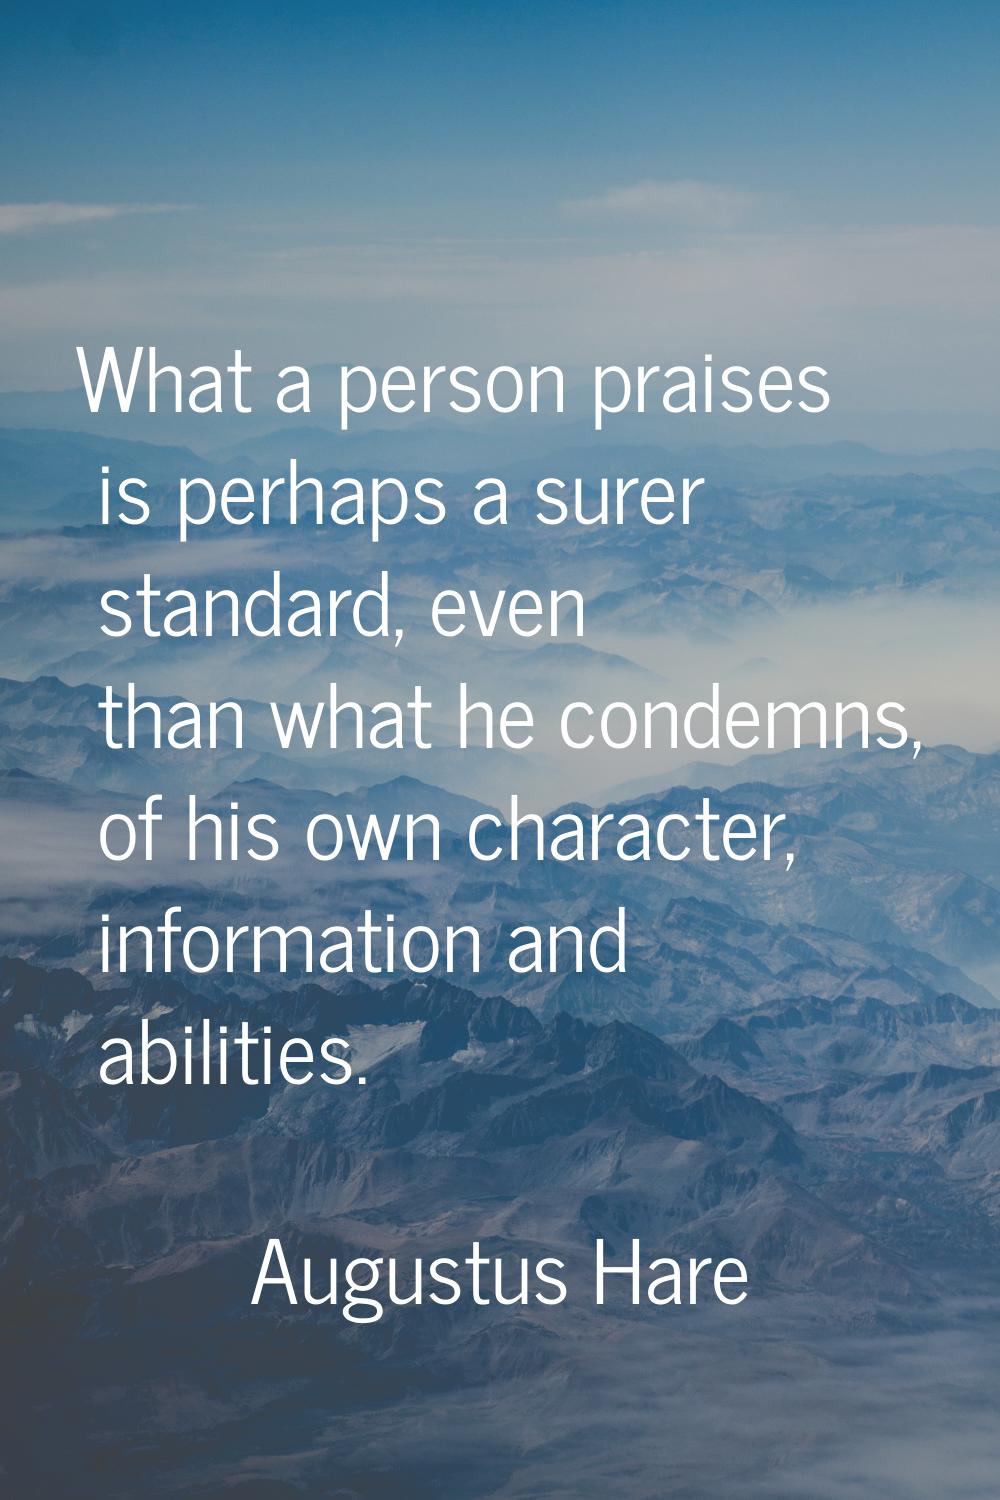 What a person praises is perhaps a surer standard, even than what he condemns, of his own character